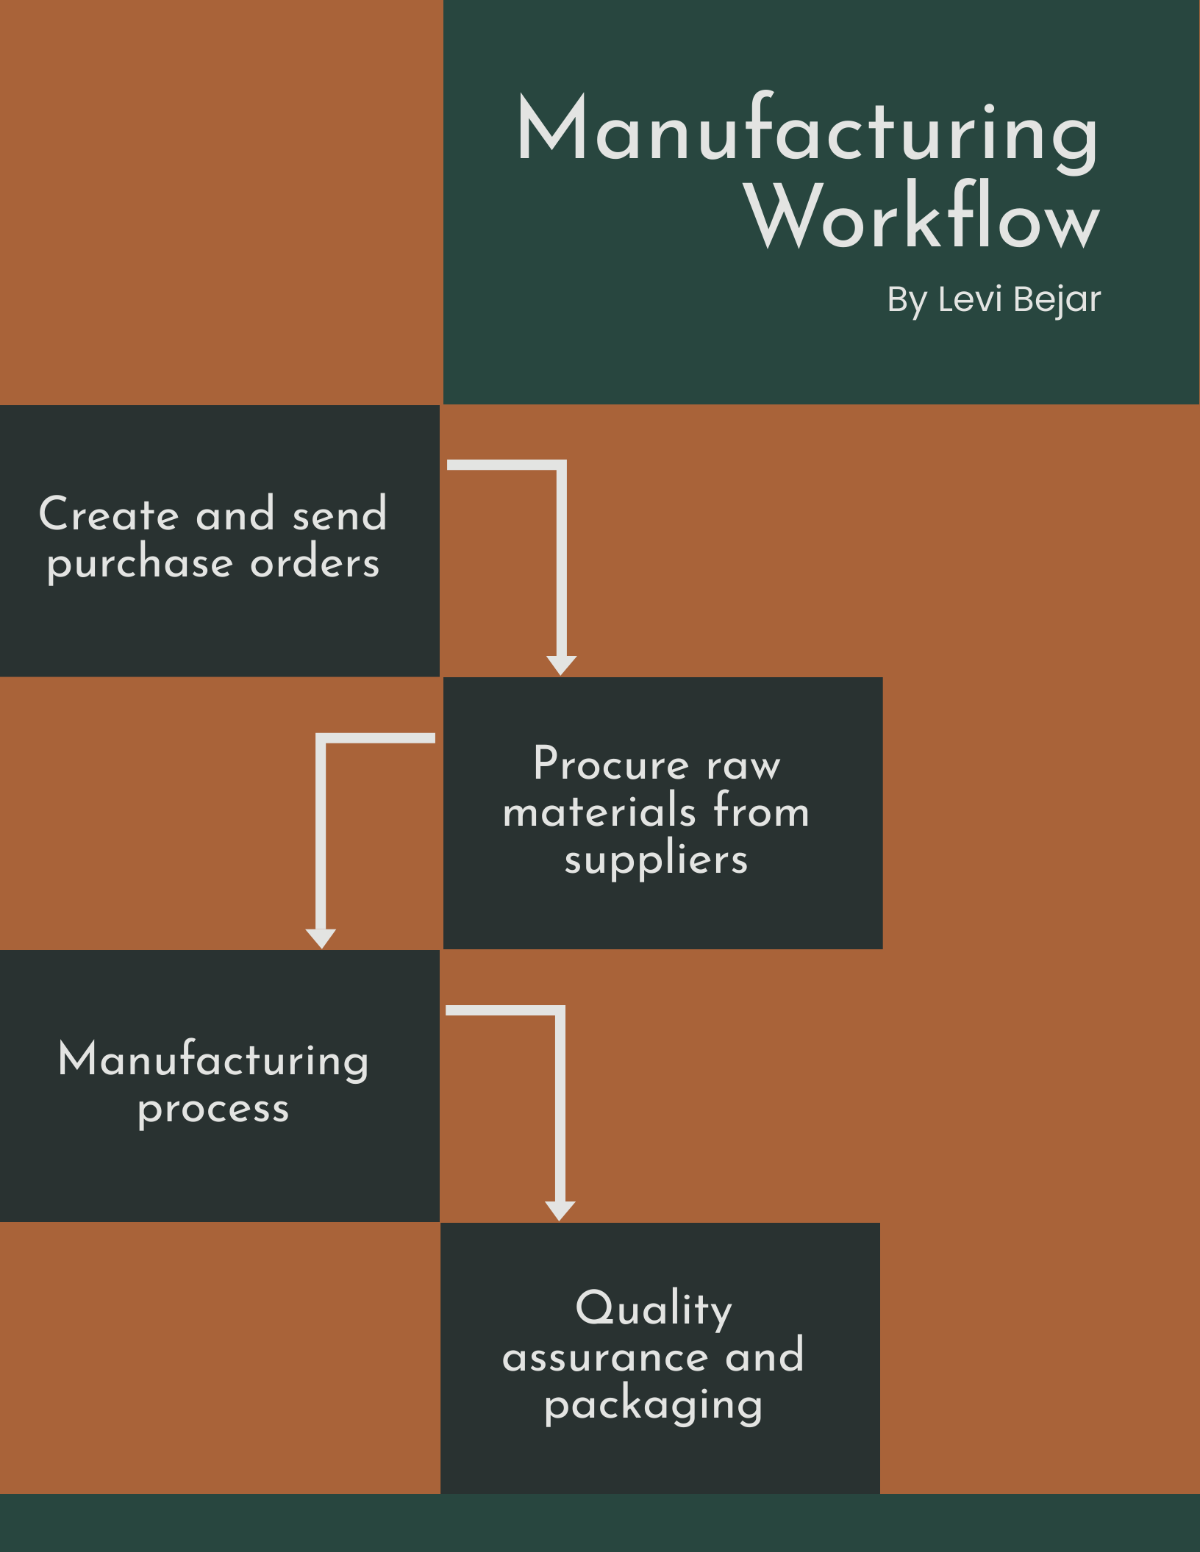 Manufacturing Workflow Template